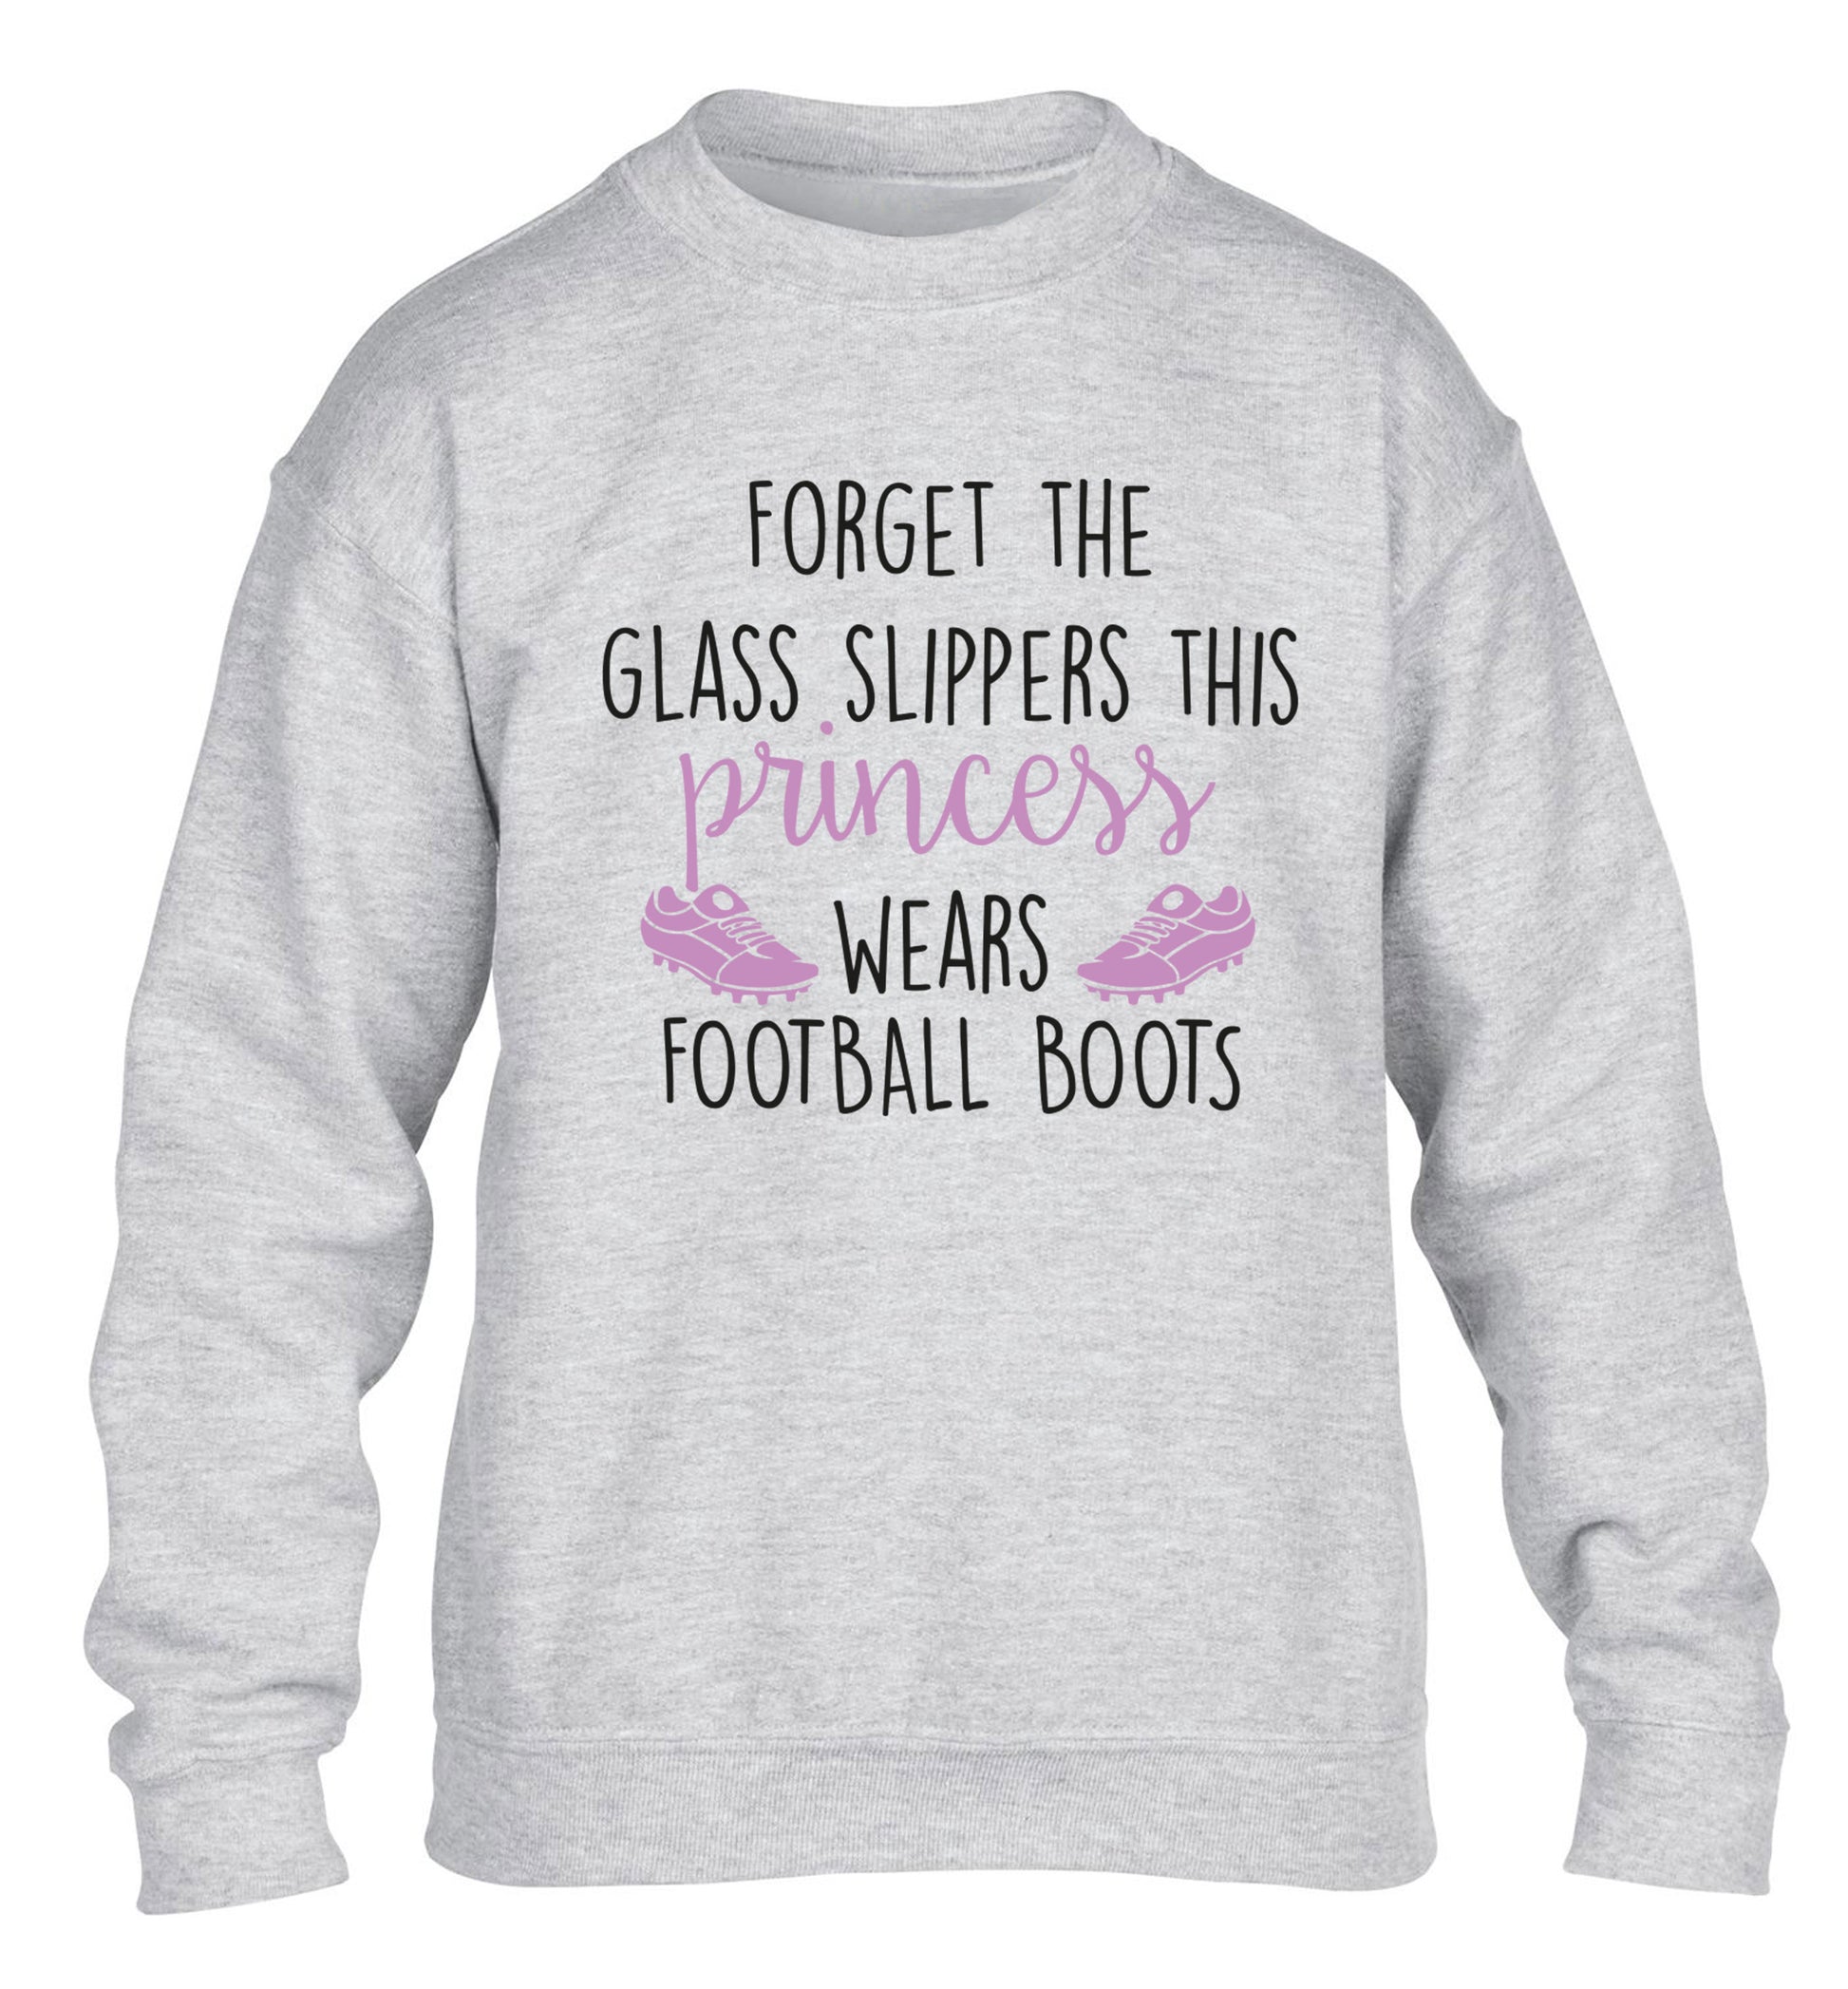 Forget the glass slippers this princess wears football boots children's grey sweater 12-14 Years